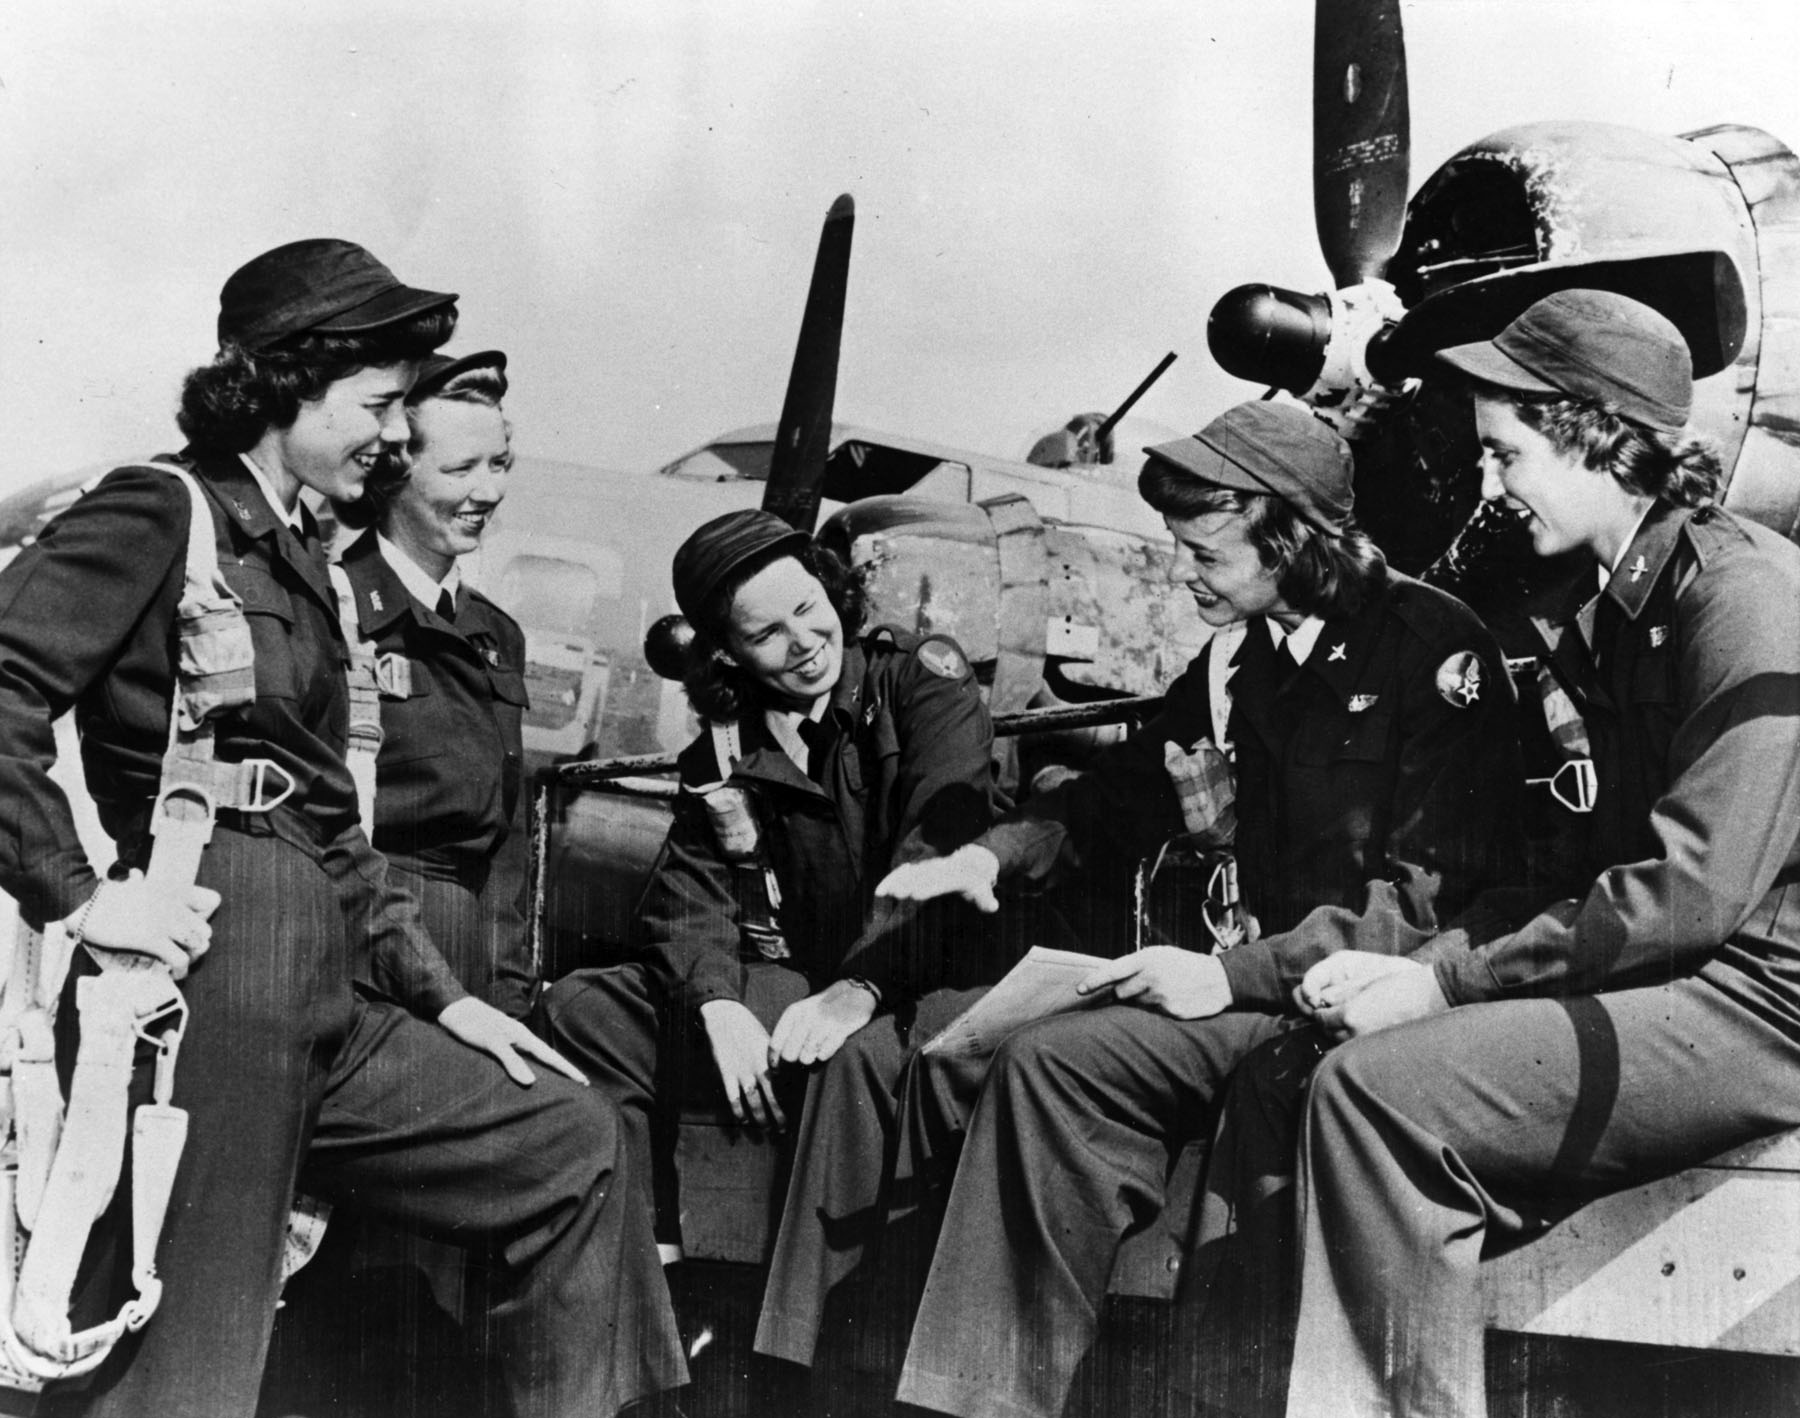 Five women dressed in WWII era uniforms gathered on an airfield with two military planes visible in the background.